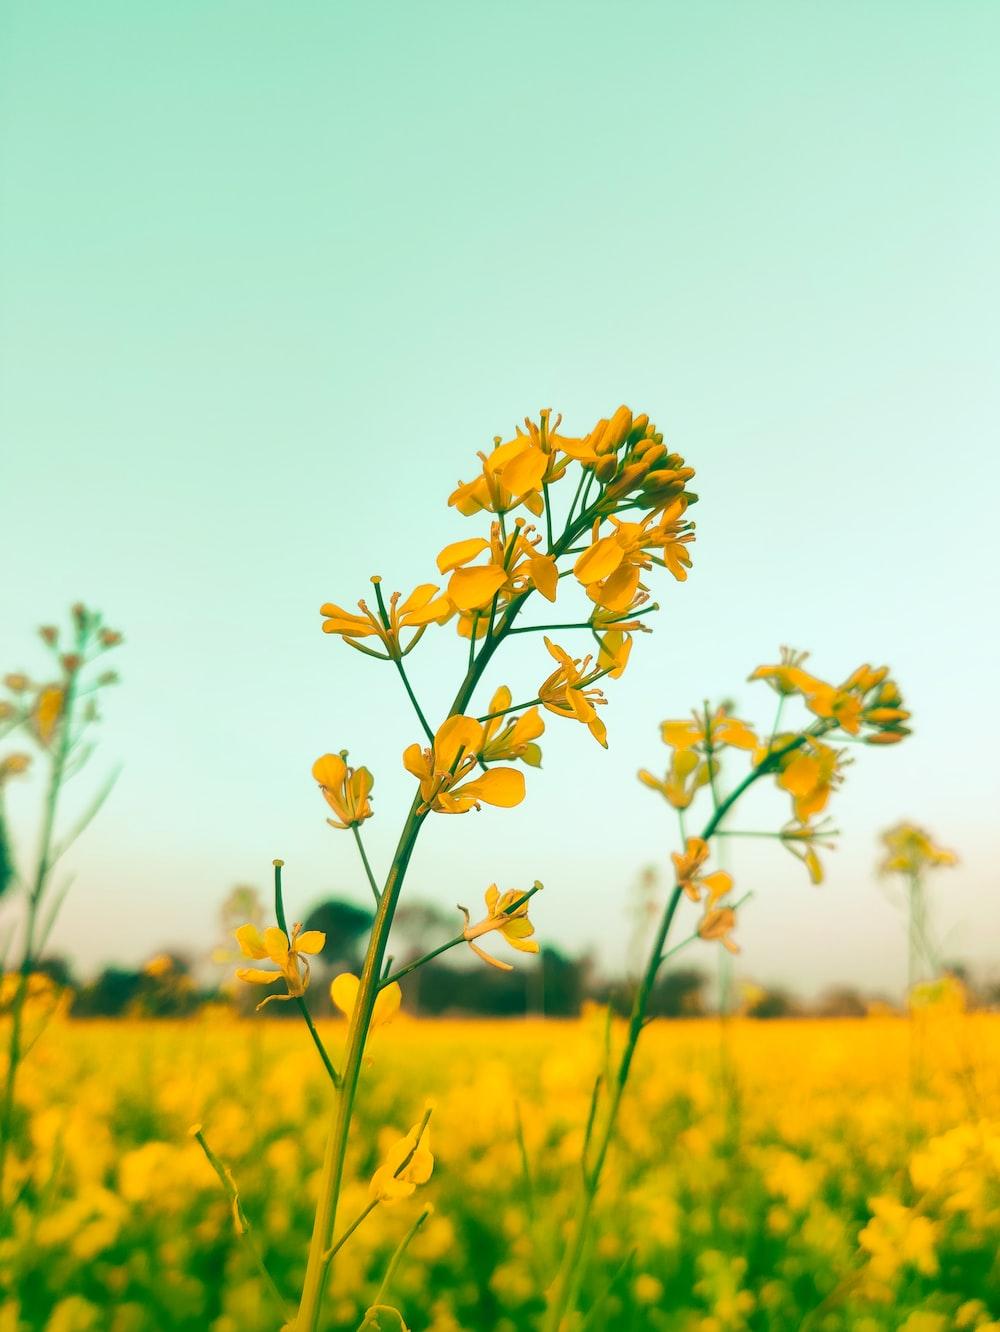 A Field Full Of Yellow Flowers Under Blue Sky Photo